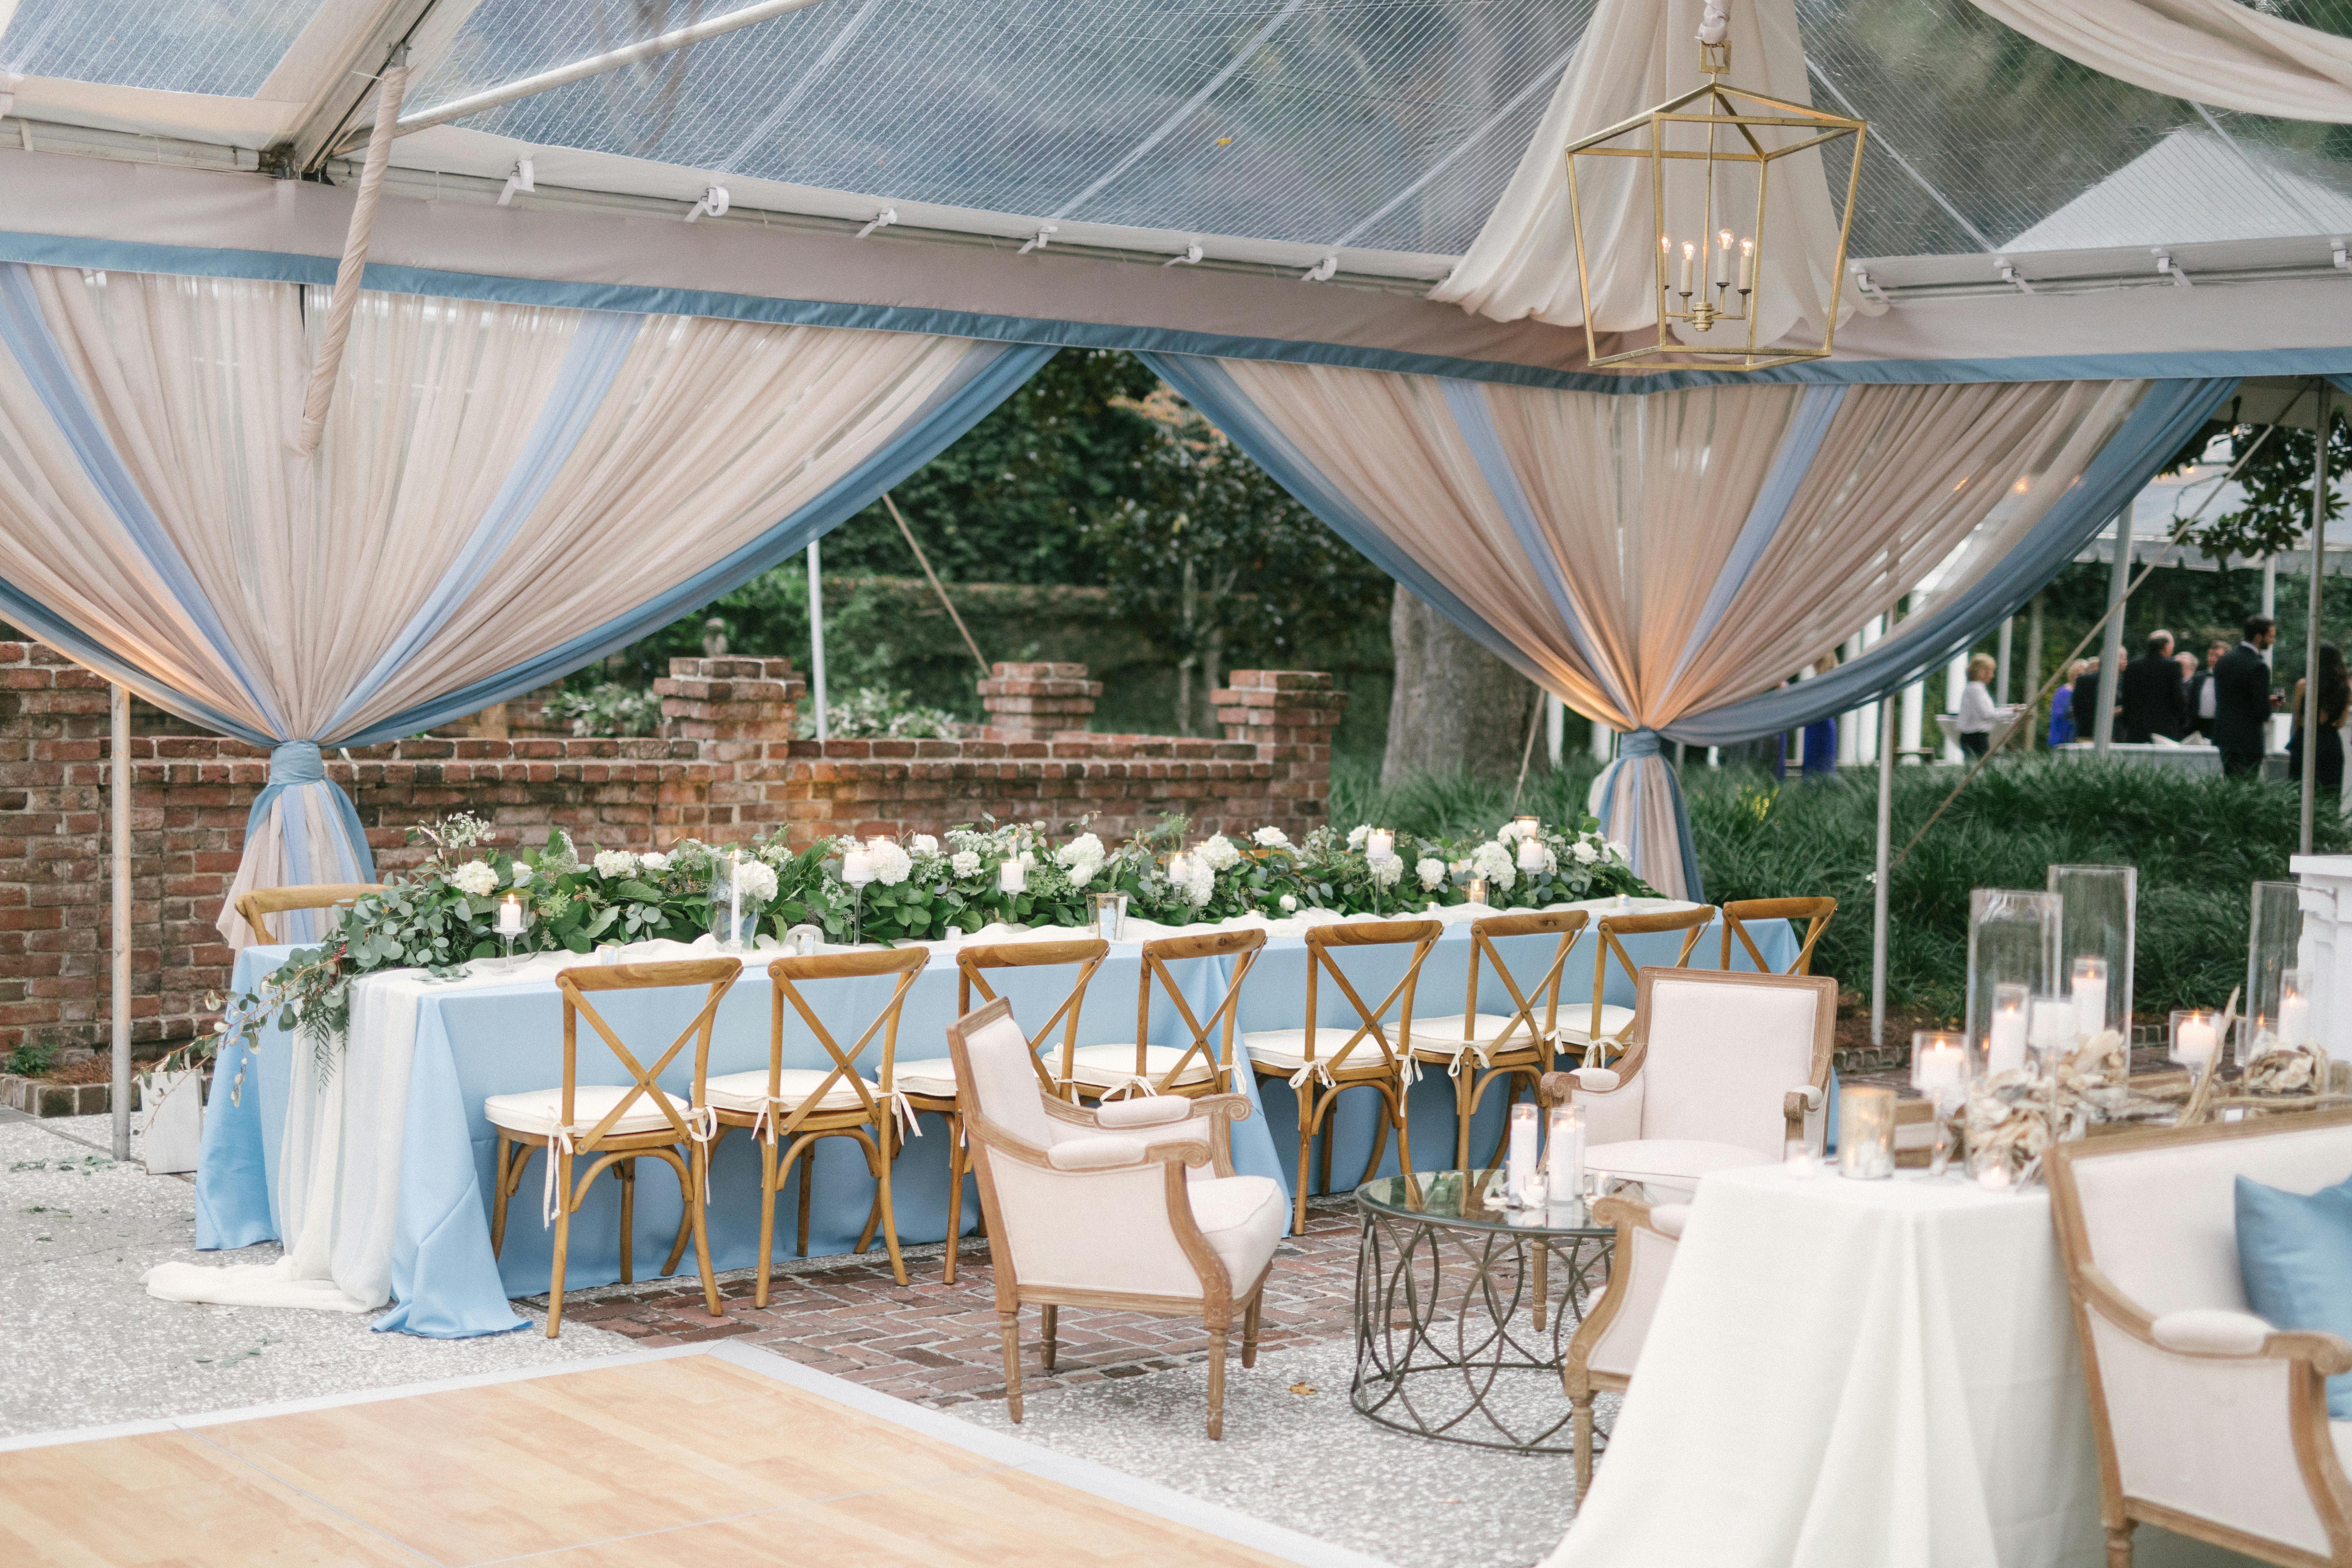 Tented Wedding with Cornflower Blue and White Spring Colors | PartySlate